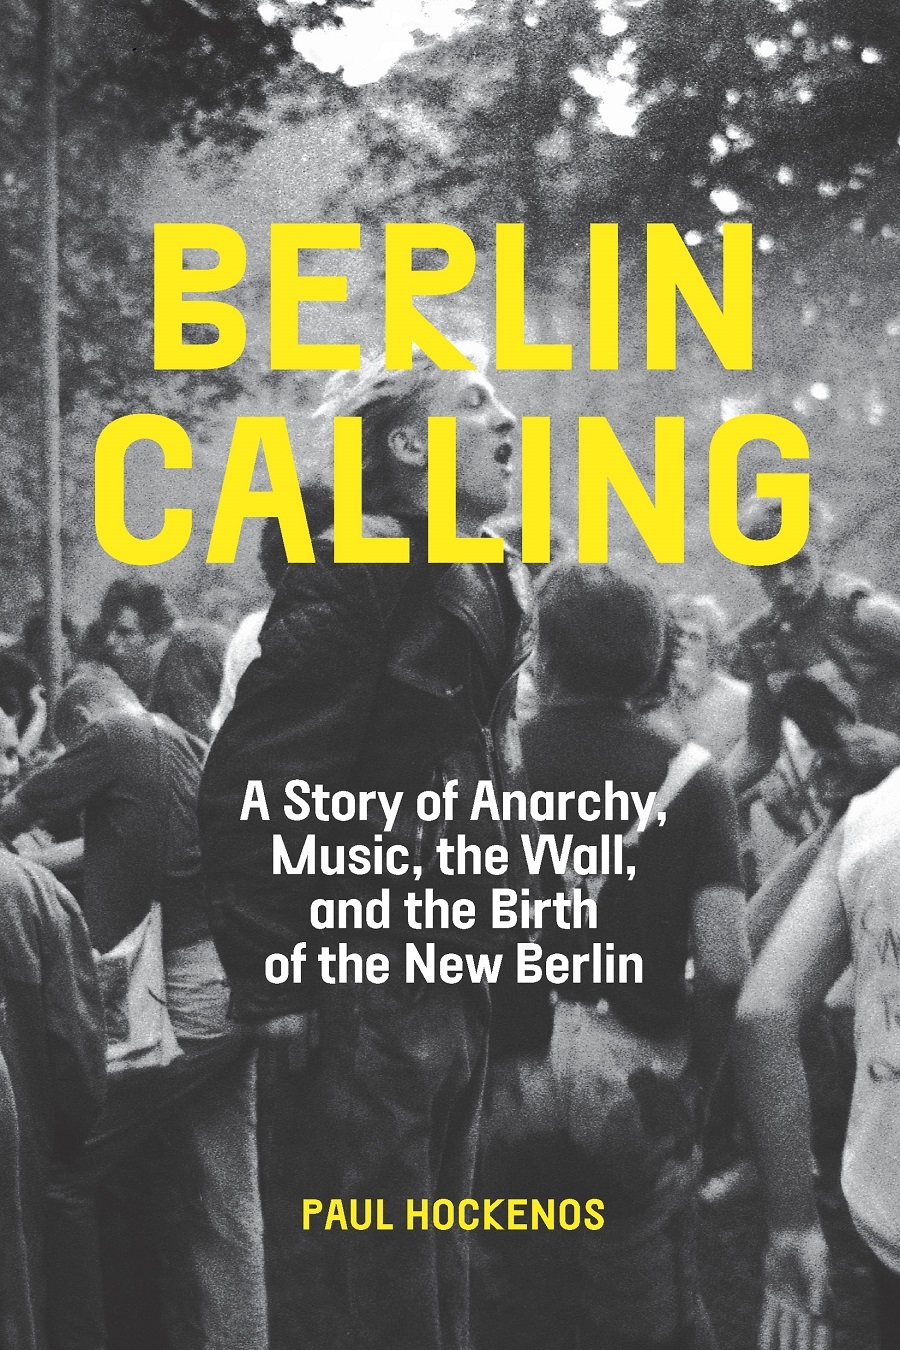 Berlin Calling – Event at Northshire Bookstore Aug. 11